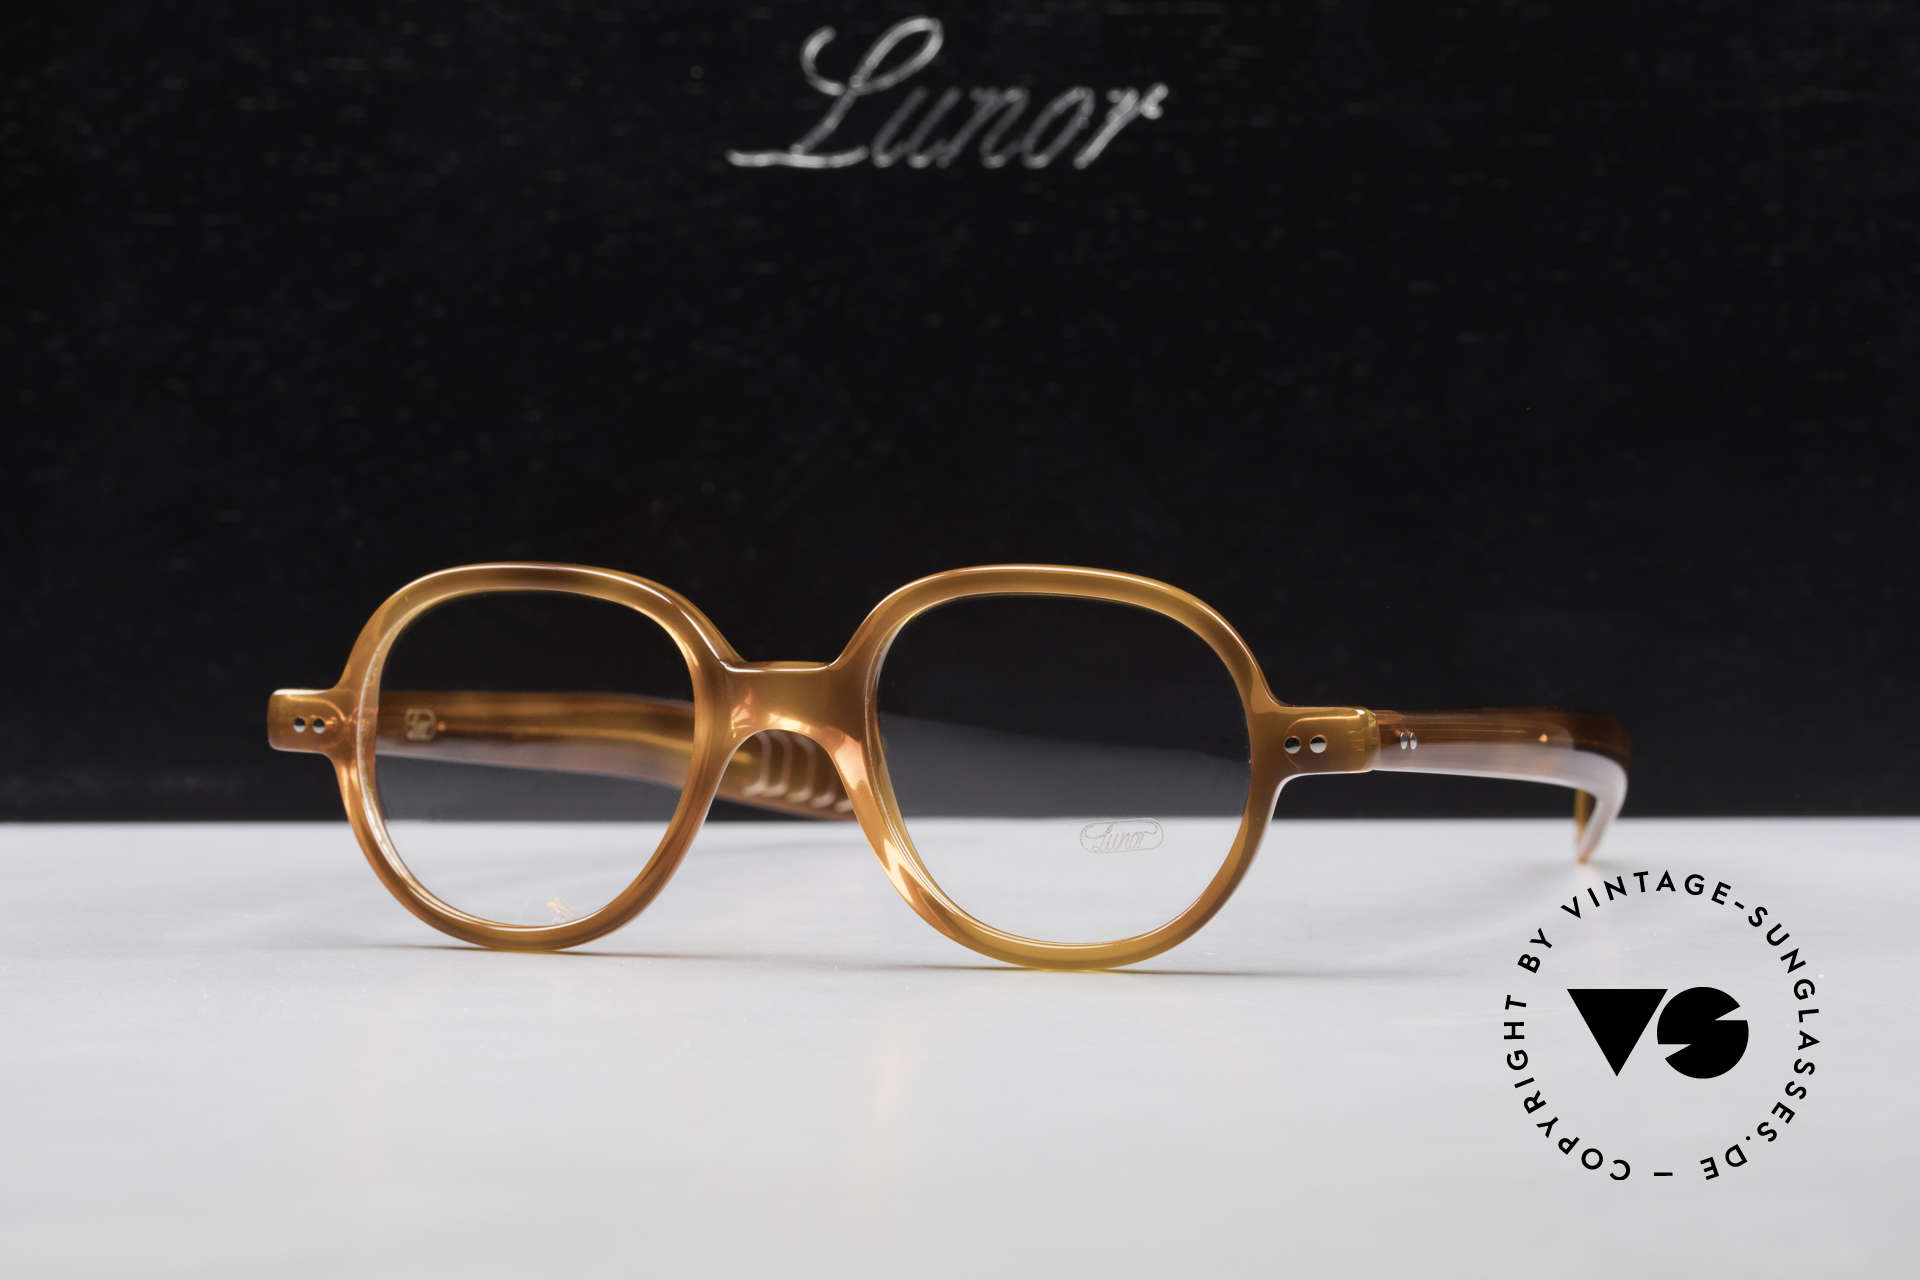 Lunor A50 Round Panto Acetate Glasses, Size: medium, Made for Men and Women